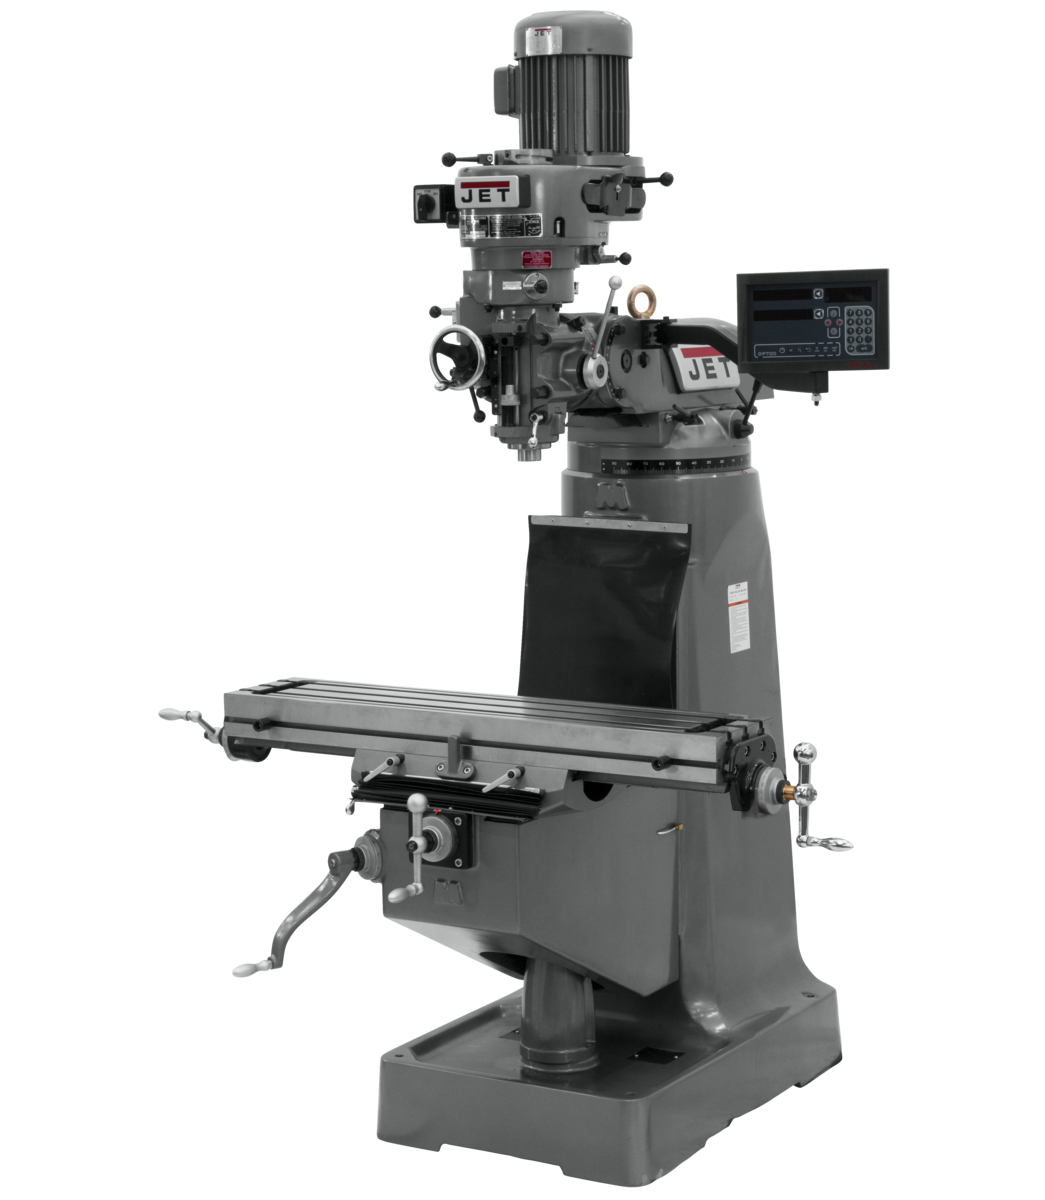 JTM-2 Mill With 3-Axis Newall DP700 DRO (Knee)